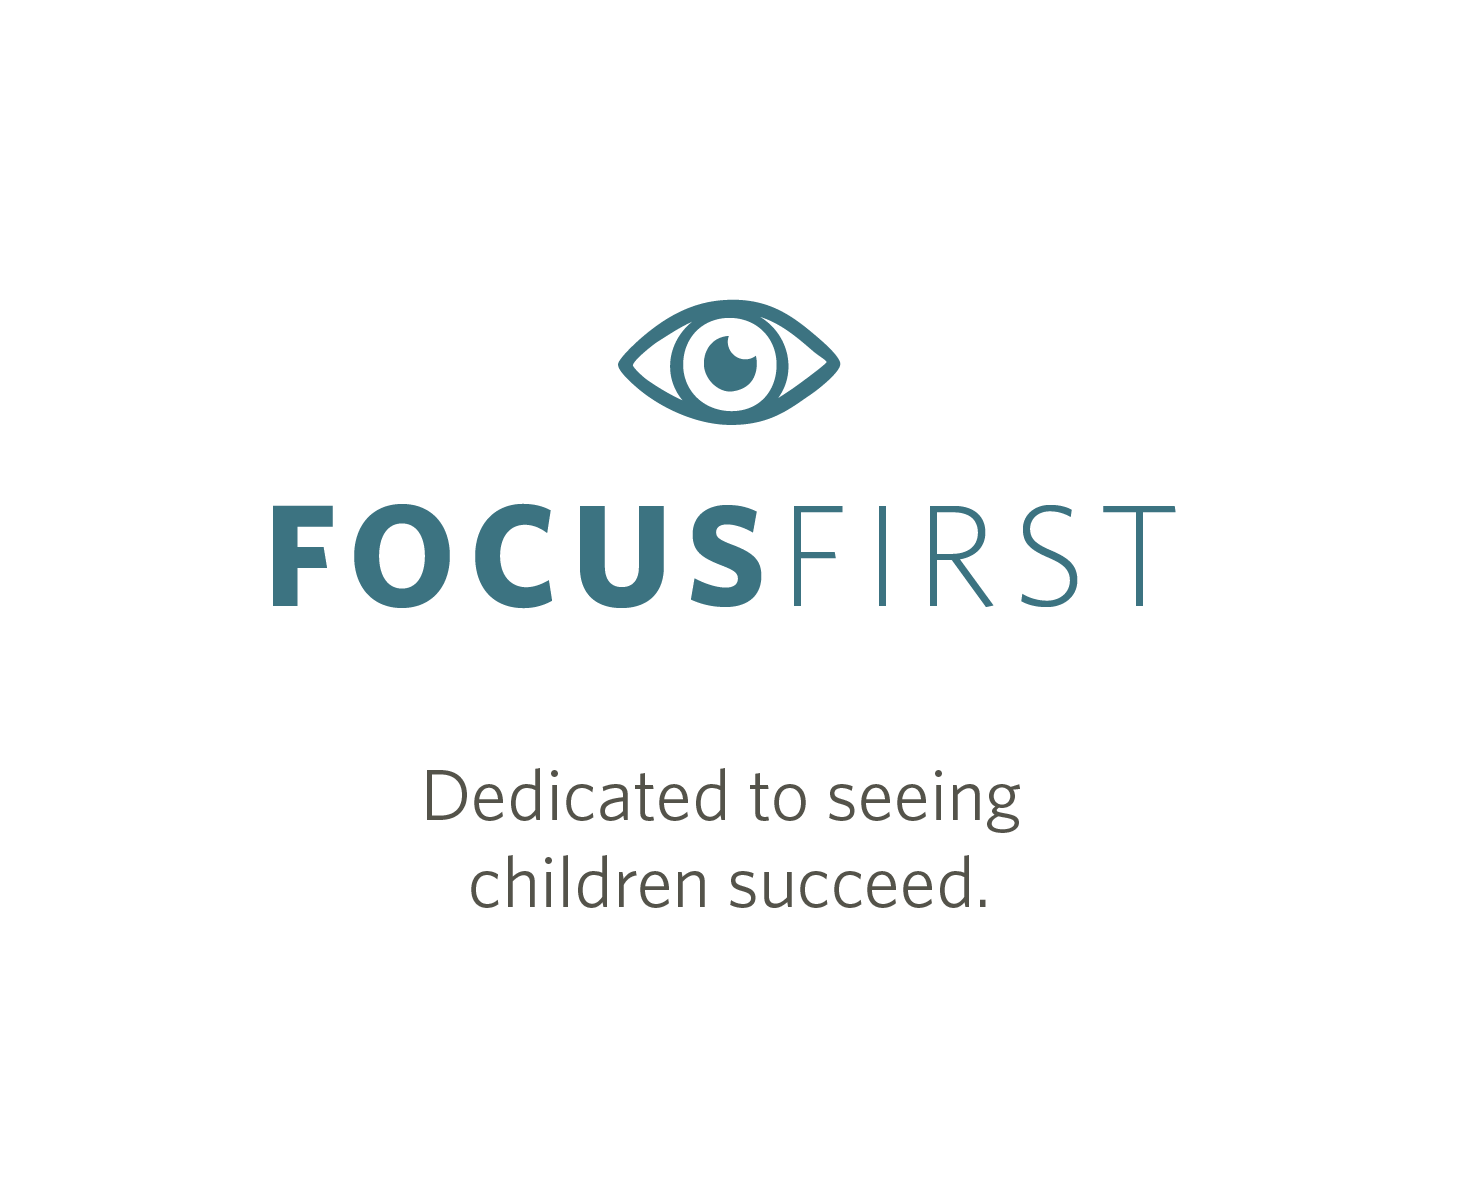 FocusFirst - Dedicated to seeing children succeed